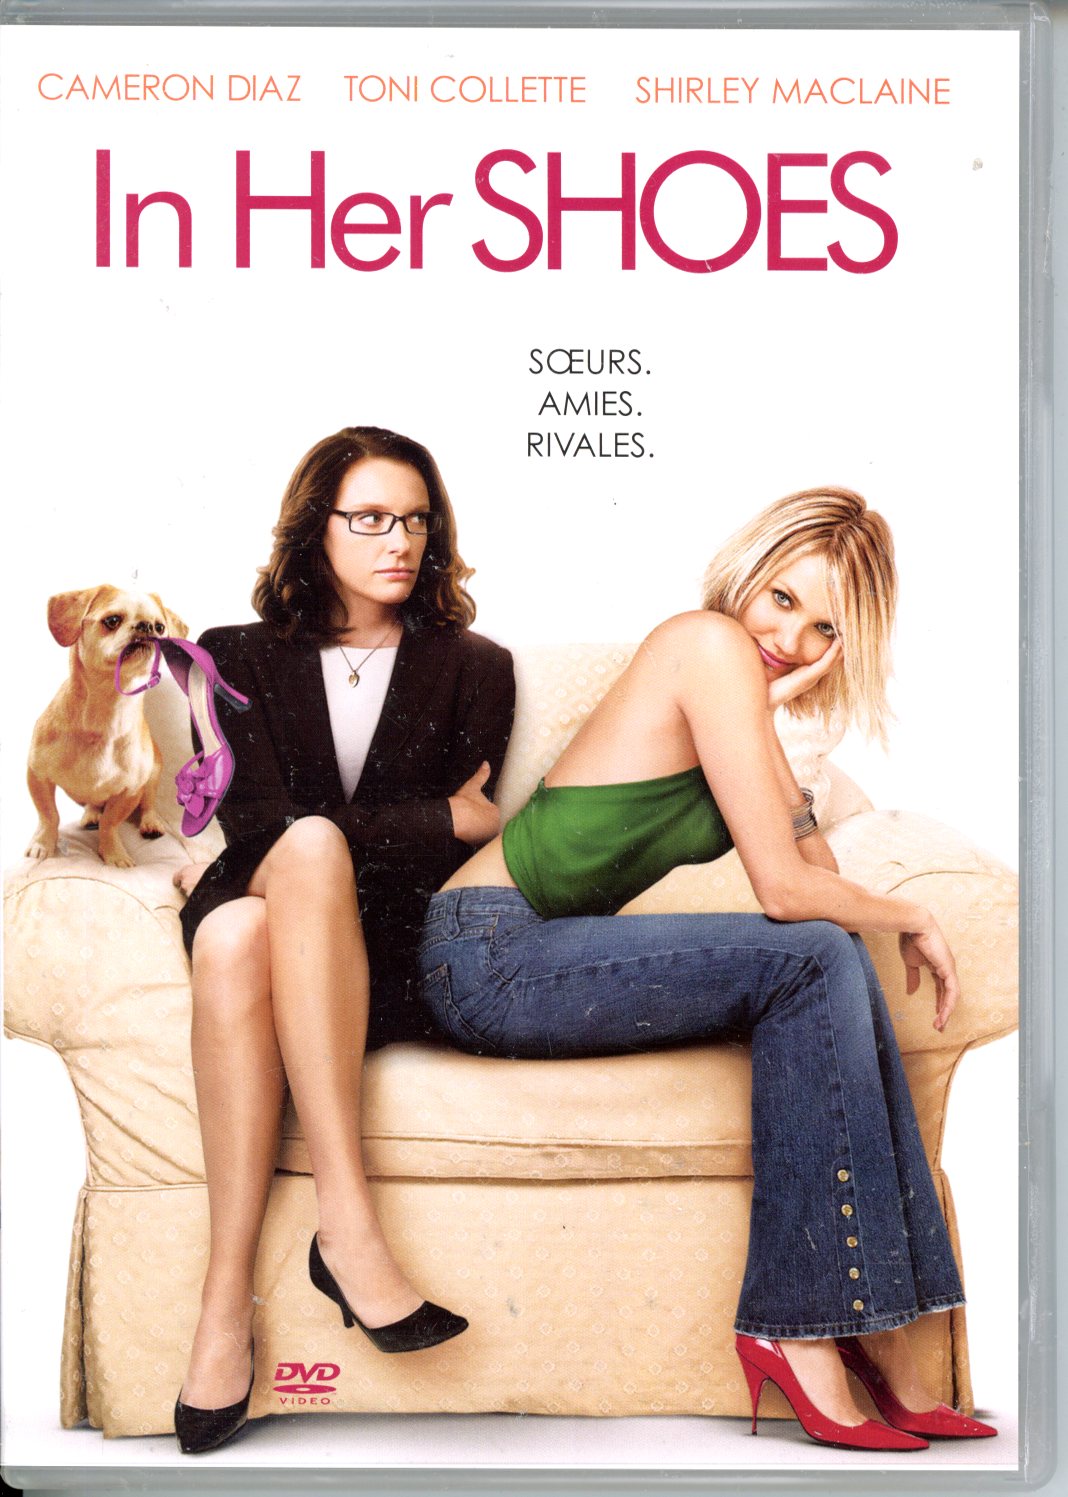 DVD IN HER SHOES AVEC CAMERON DIAZ - TONI COLLETTE - SHIRLEY MACLAINE